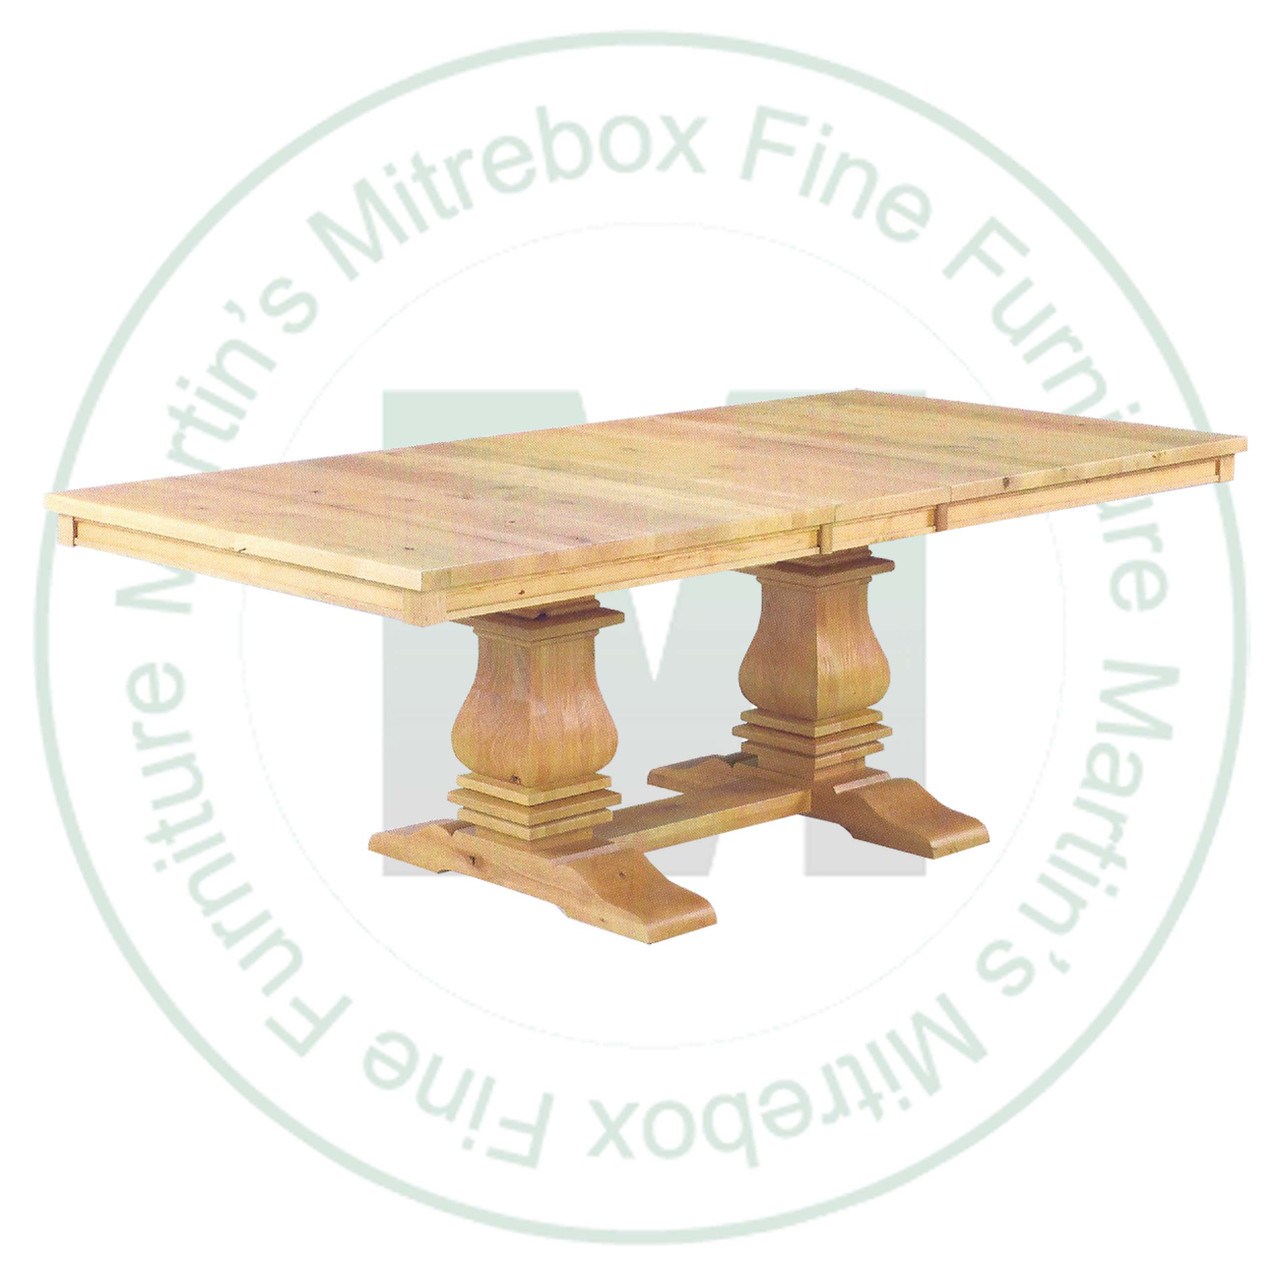 Oak Mediterranean Double Pedestal Table 42''D x 96''W x 30''H With 2 - 12'' Leaves. Table Has 1.25'' Thick Top